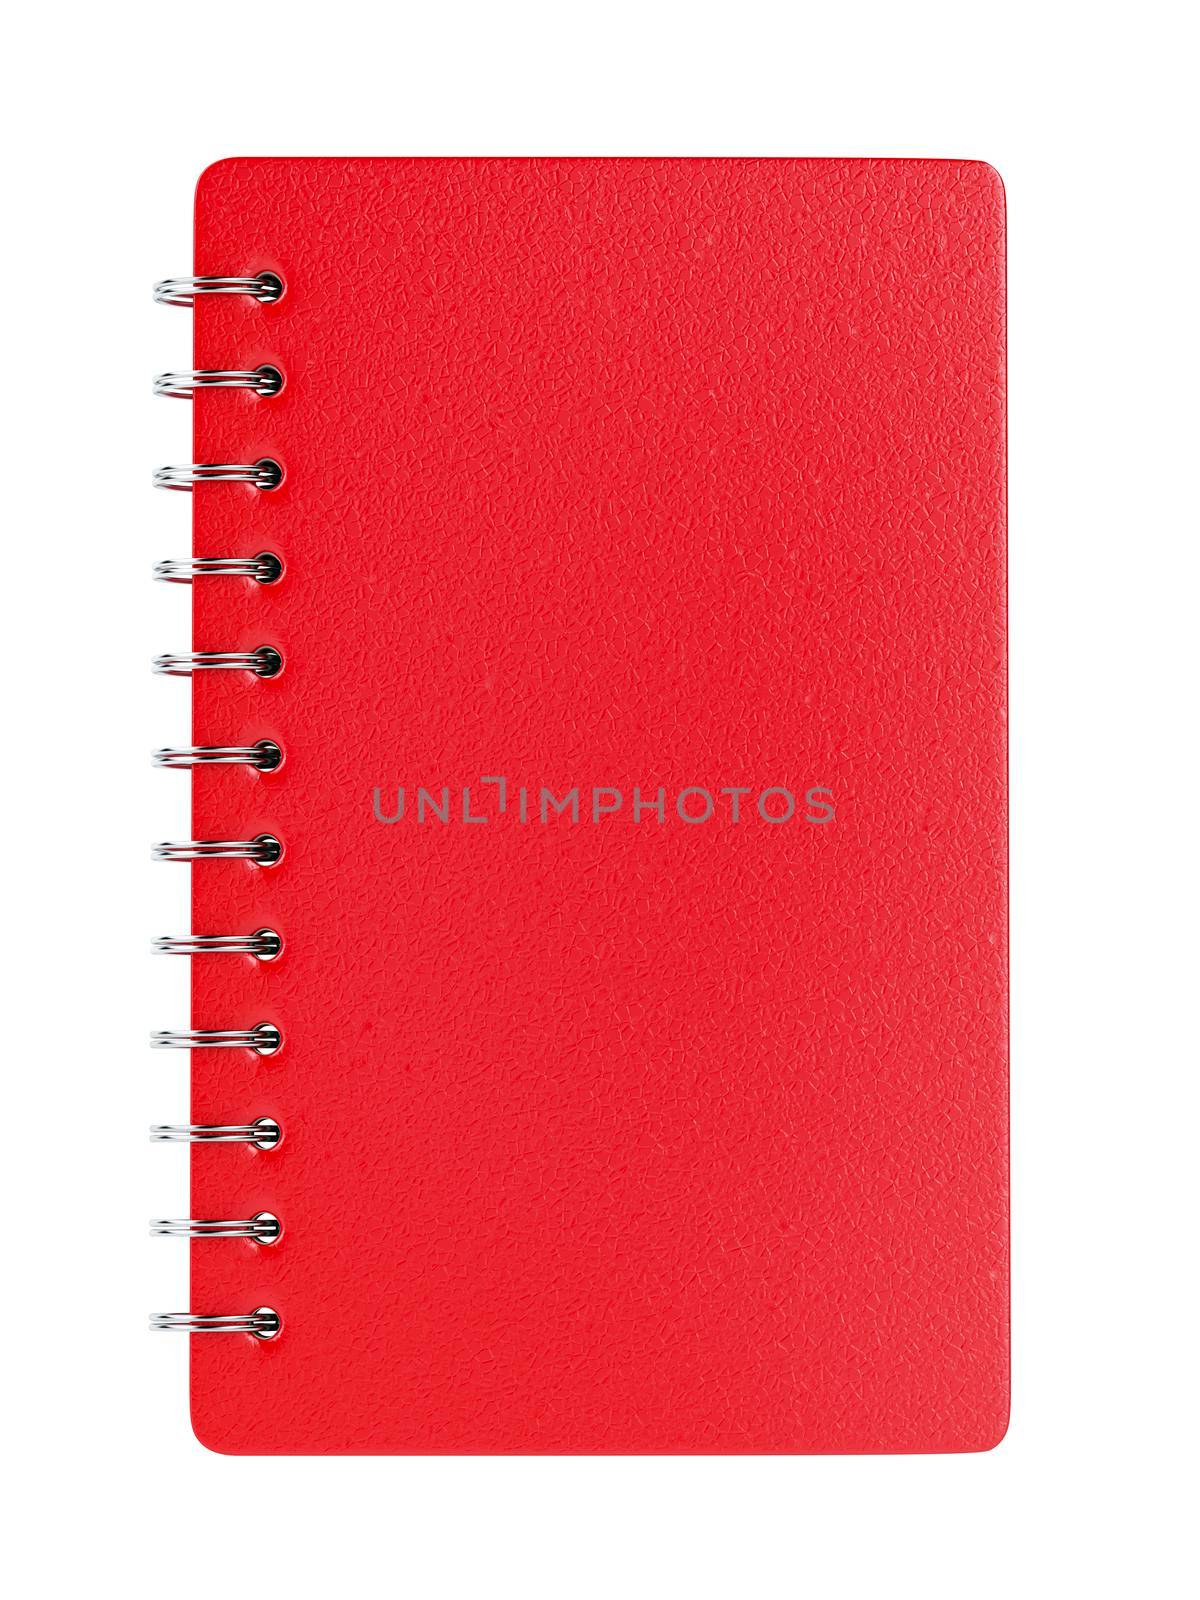 Red notebook isolated on white background, front view